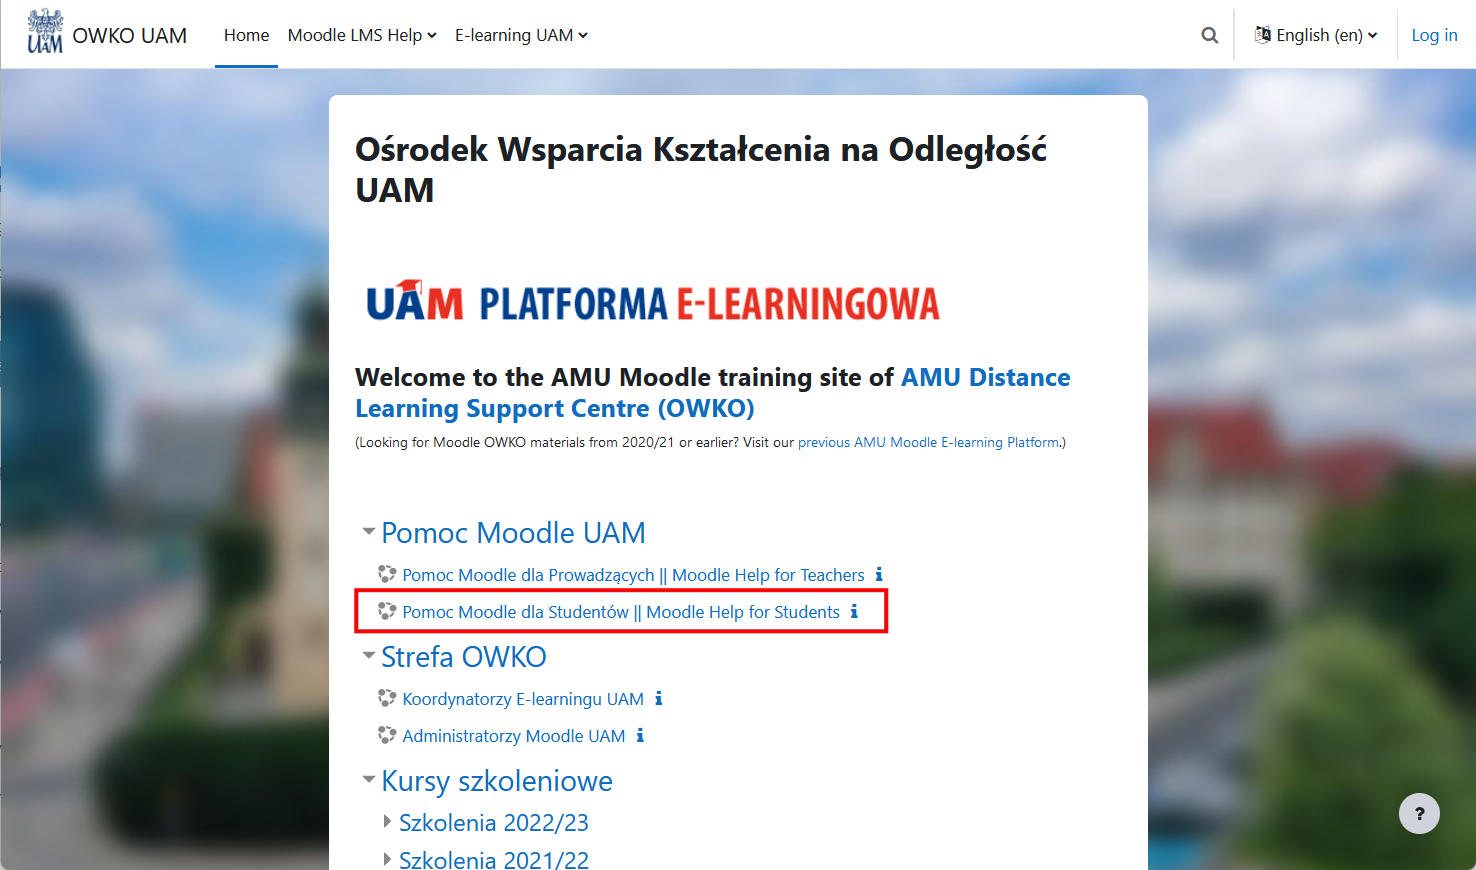 Moodle Help for Students course on Moodle OWKO